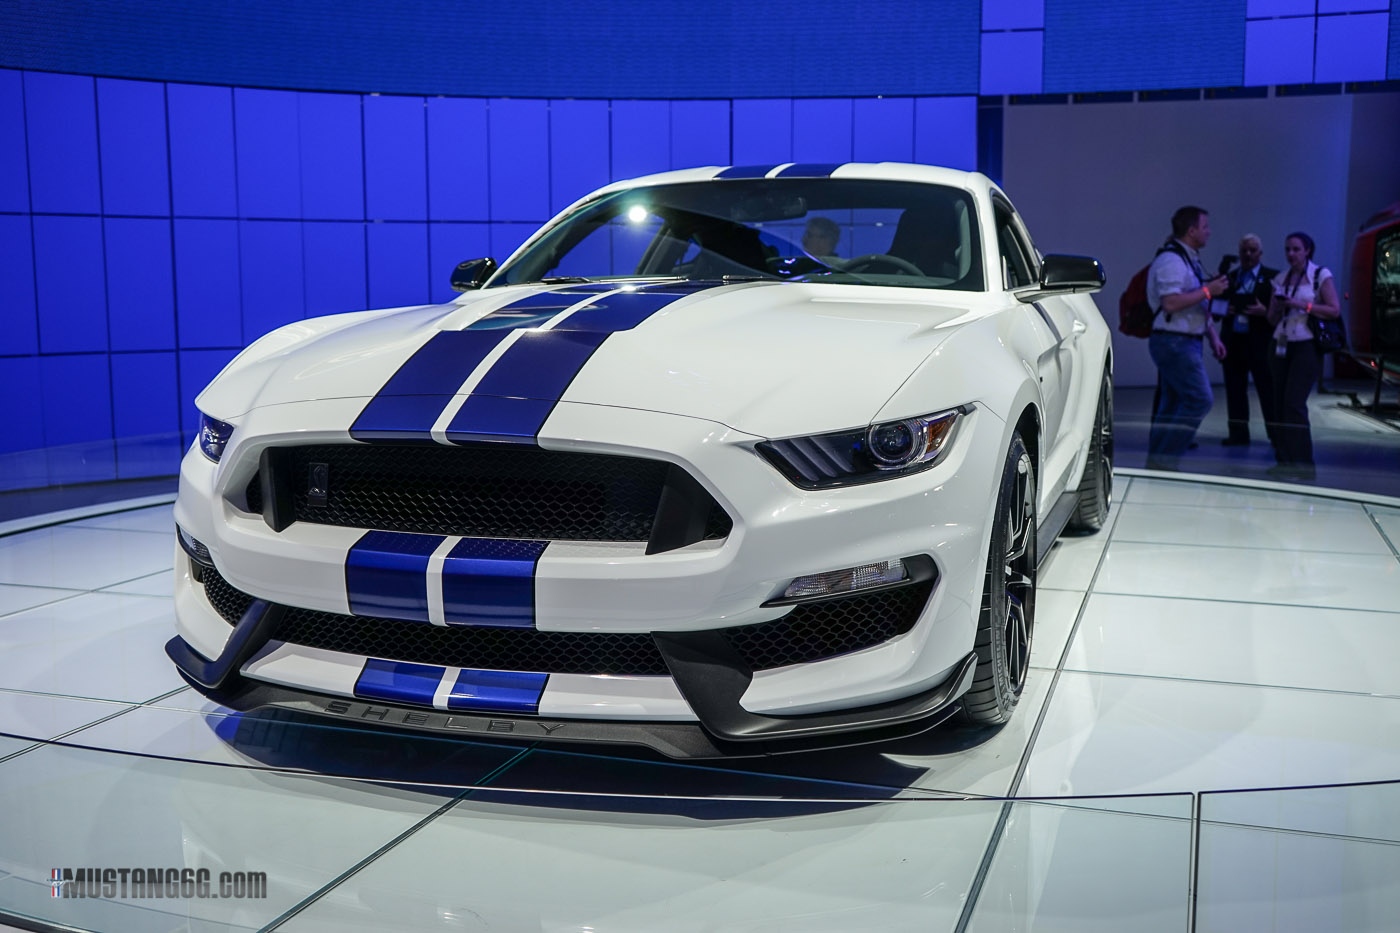 2016 Shelby GT350 Mustang - Detroit Auto Show-2.jpg